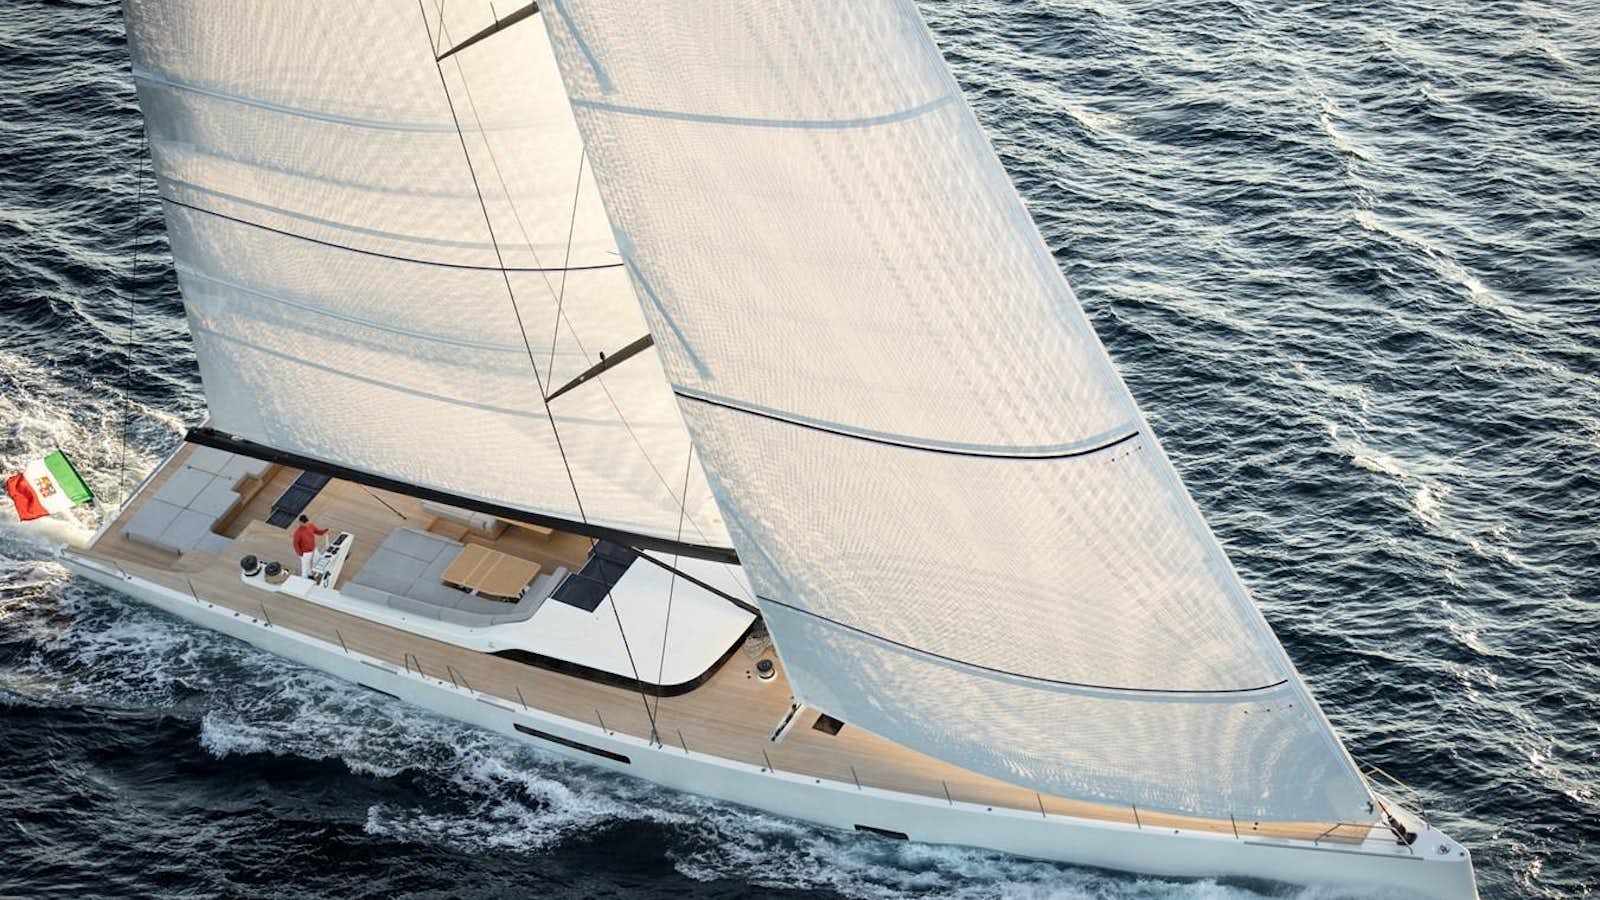 a sailboat on the water aboard CEFEA Yacht for Sale